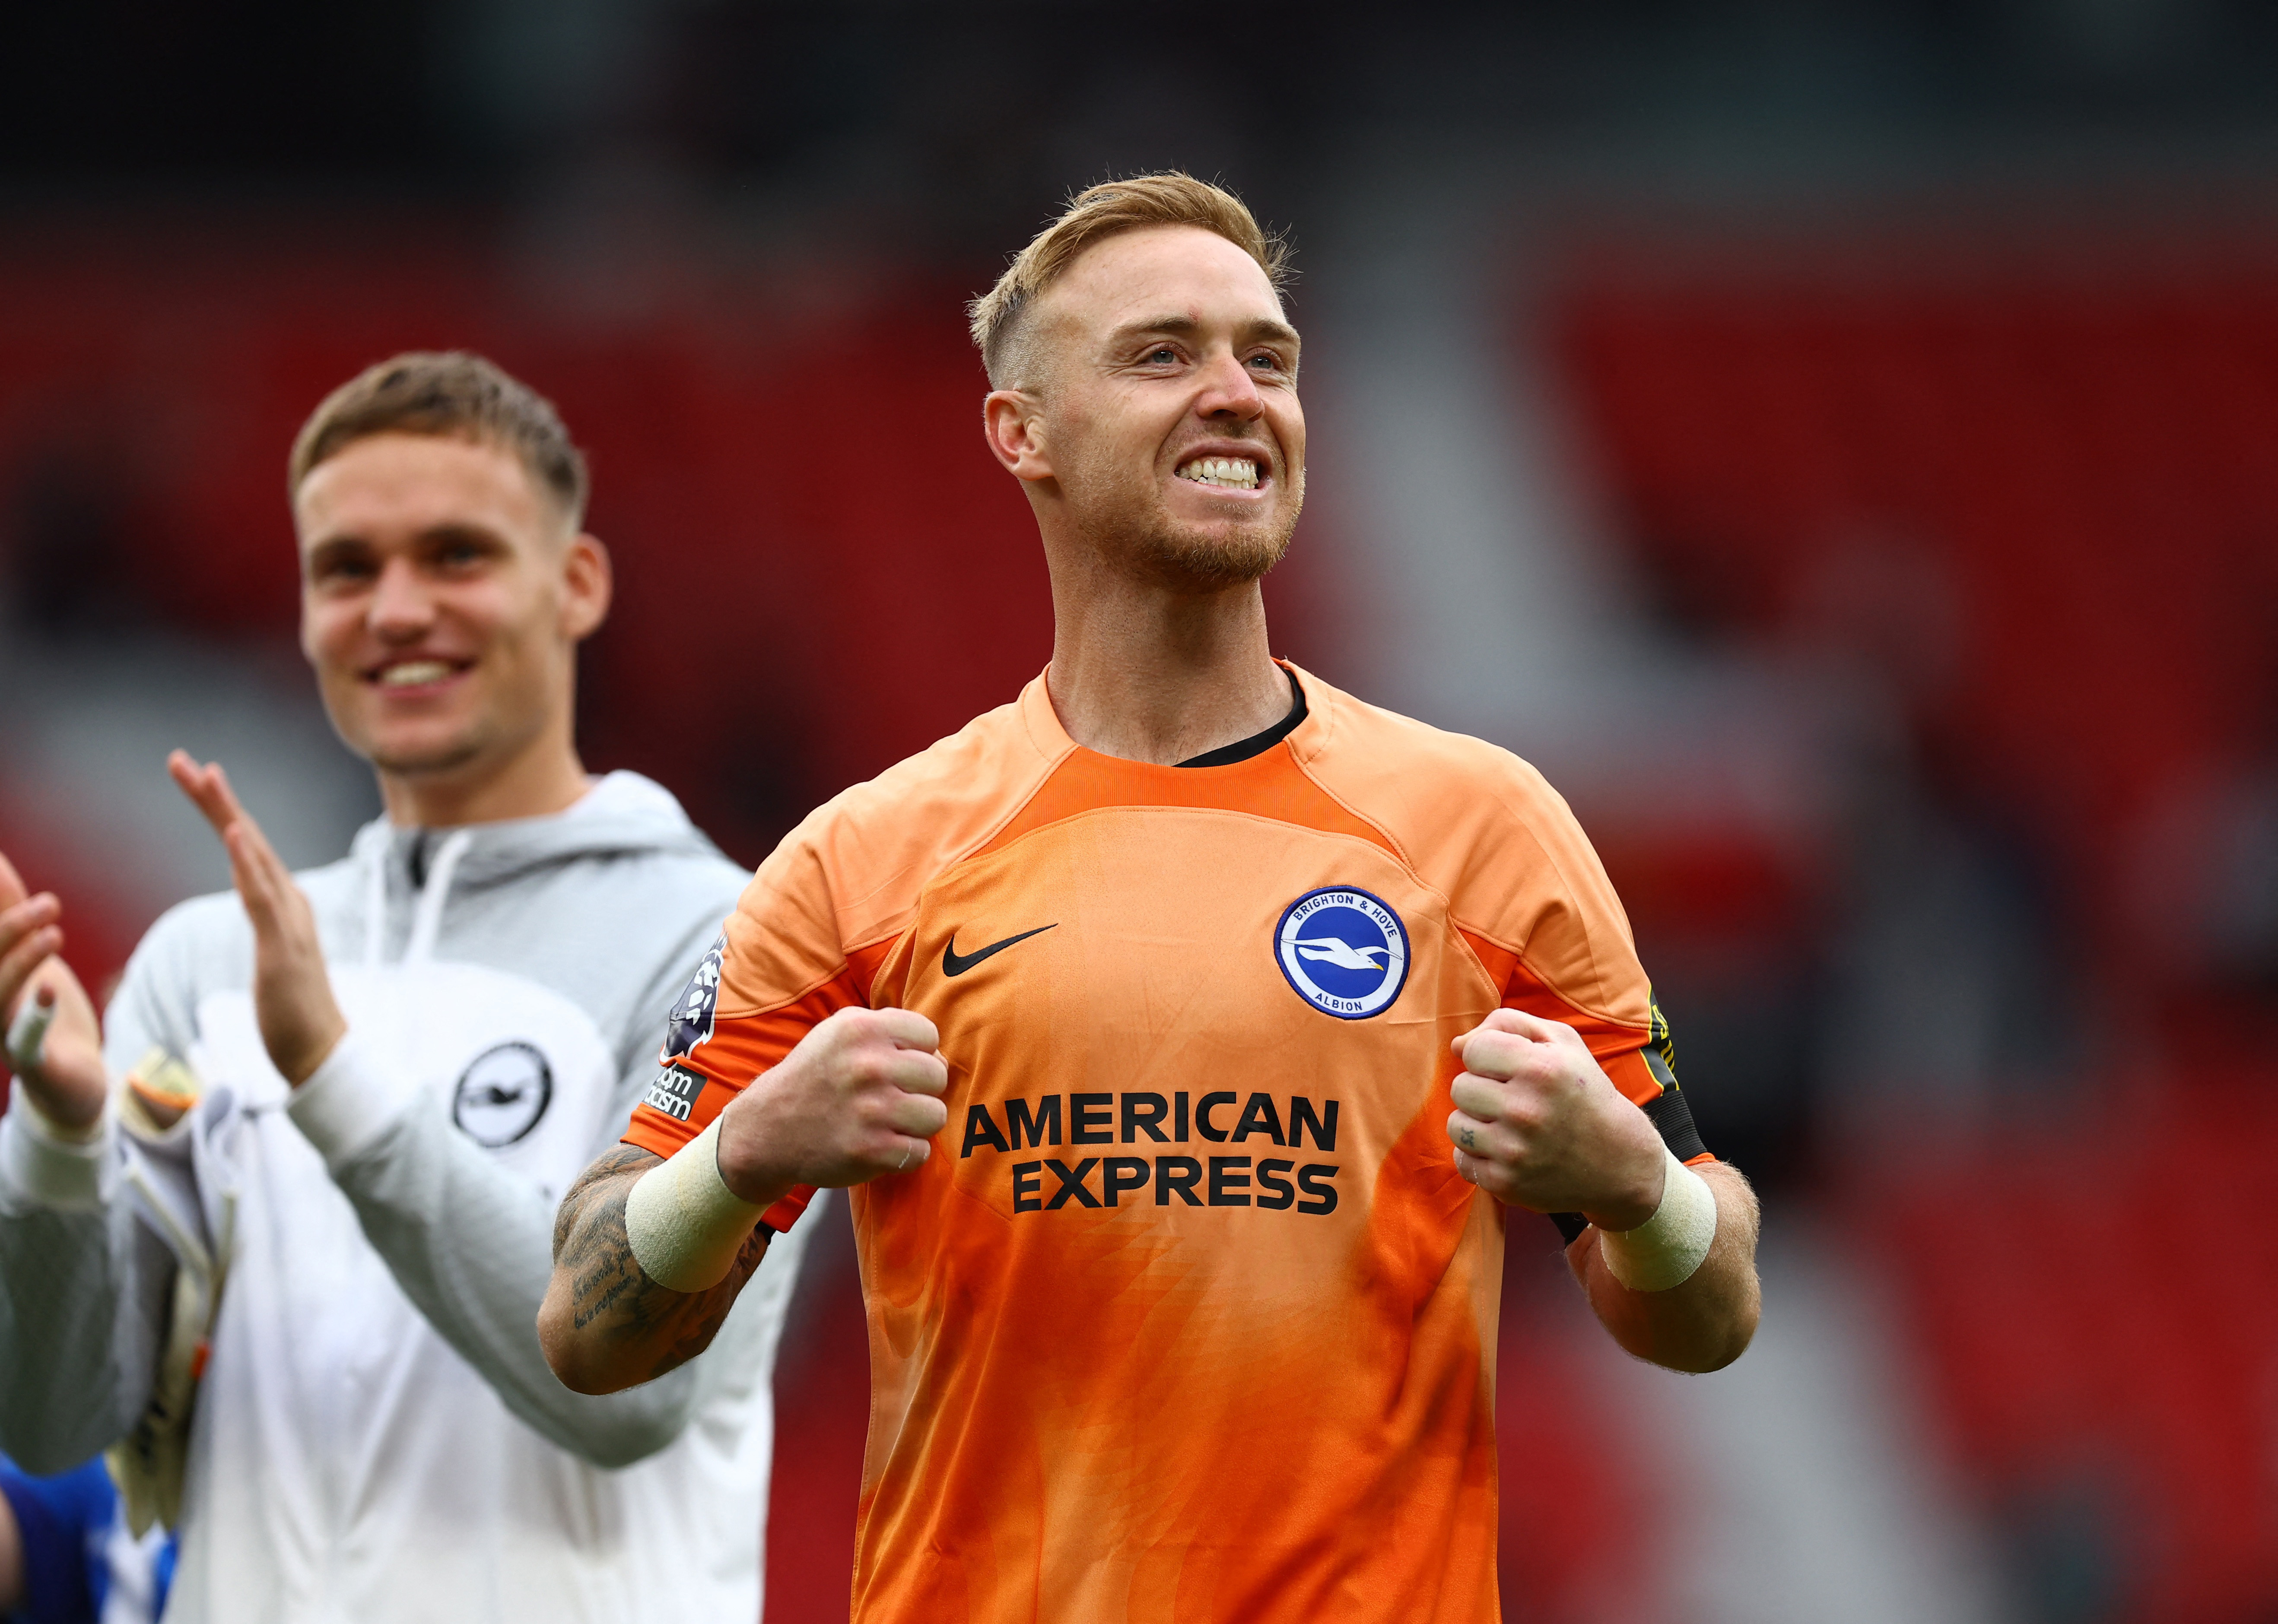 Man United humbled at home by Brighton